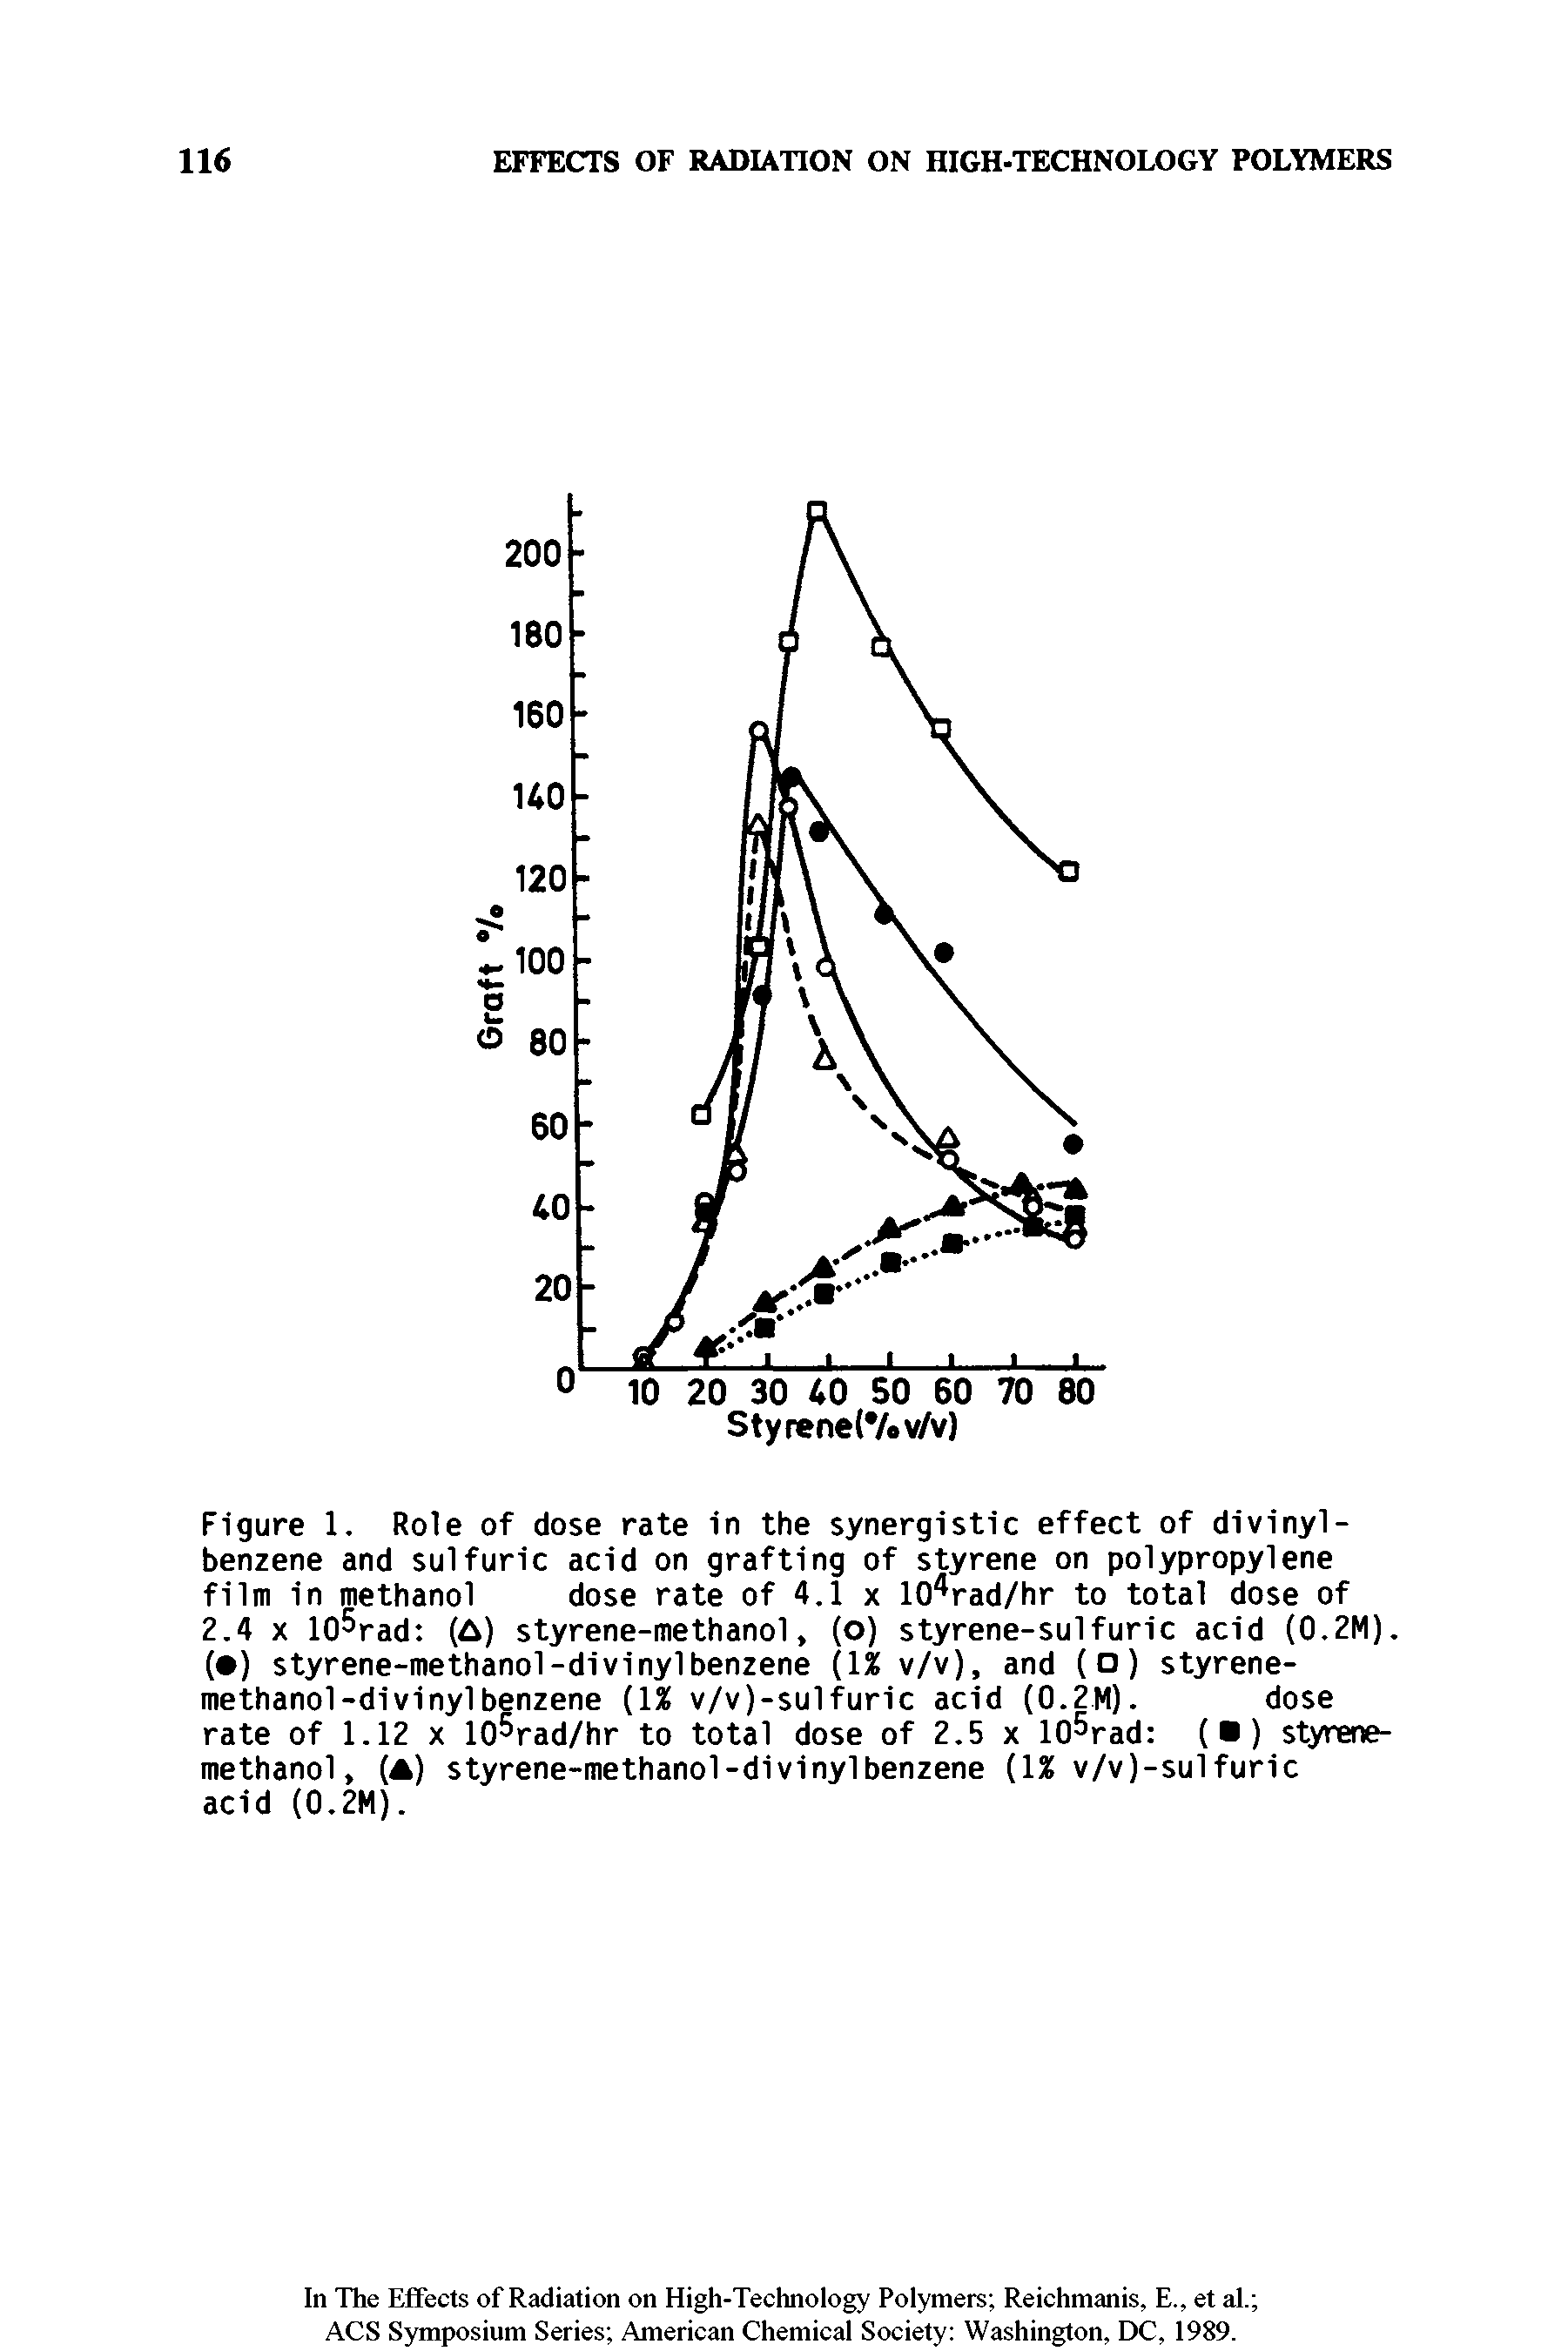 Figure 1. Role of dose rate in the synergistic effect of divinyl-benzene and sulfuric acid on grafting of styrene on polypropylene film in methanol dose rate of 4.1 x 104rad/hr to total dose of 2.4 x lO rad (A) styrene-methanol, (o) styrene-sulfuric acid (0.2M). ( ) styrene-methanol-divinylbenzene (1% v/v), and (o) styrene-methanol -di vinyl benzene (1% v/v)-sulfuric acid (0.2M). dose...